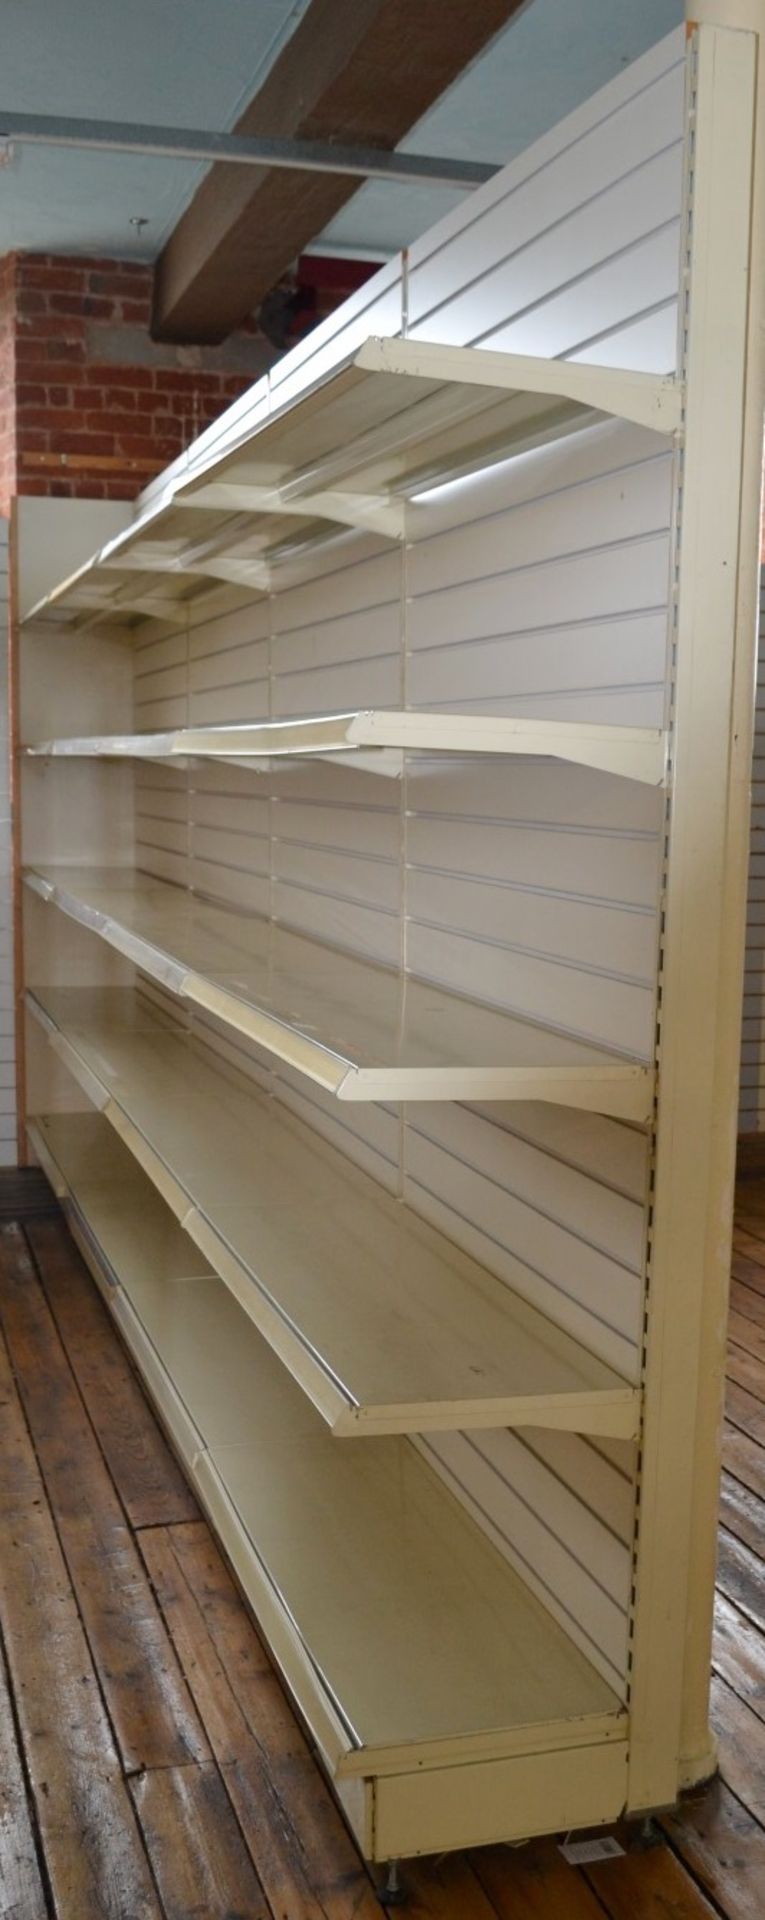 1 x Slatwall With Shelving - Approx. Total Dimensions: W480cm x H249cm - Buyer To Remove - Image 5 of 6